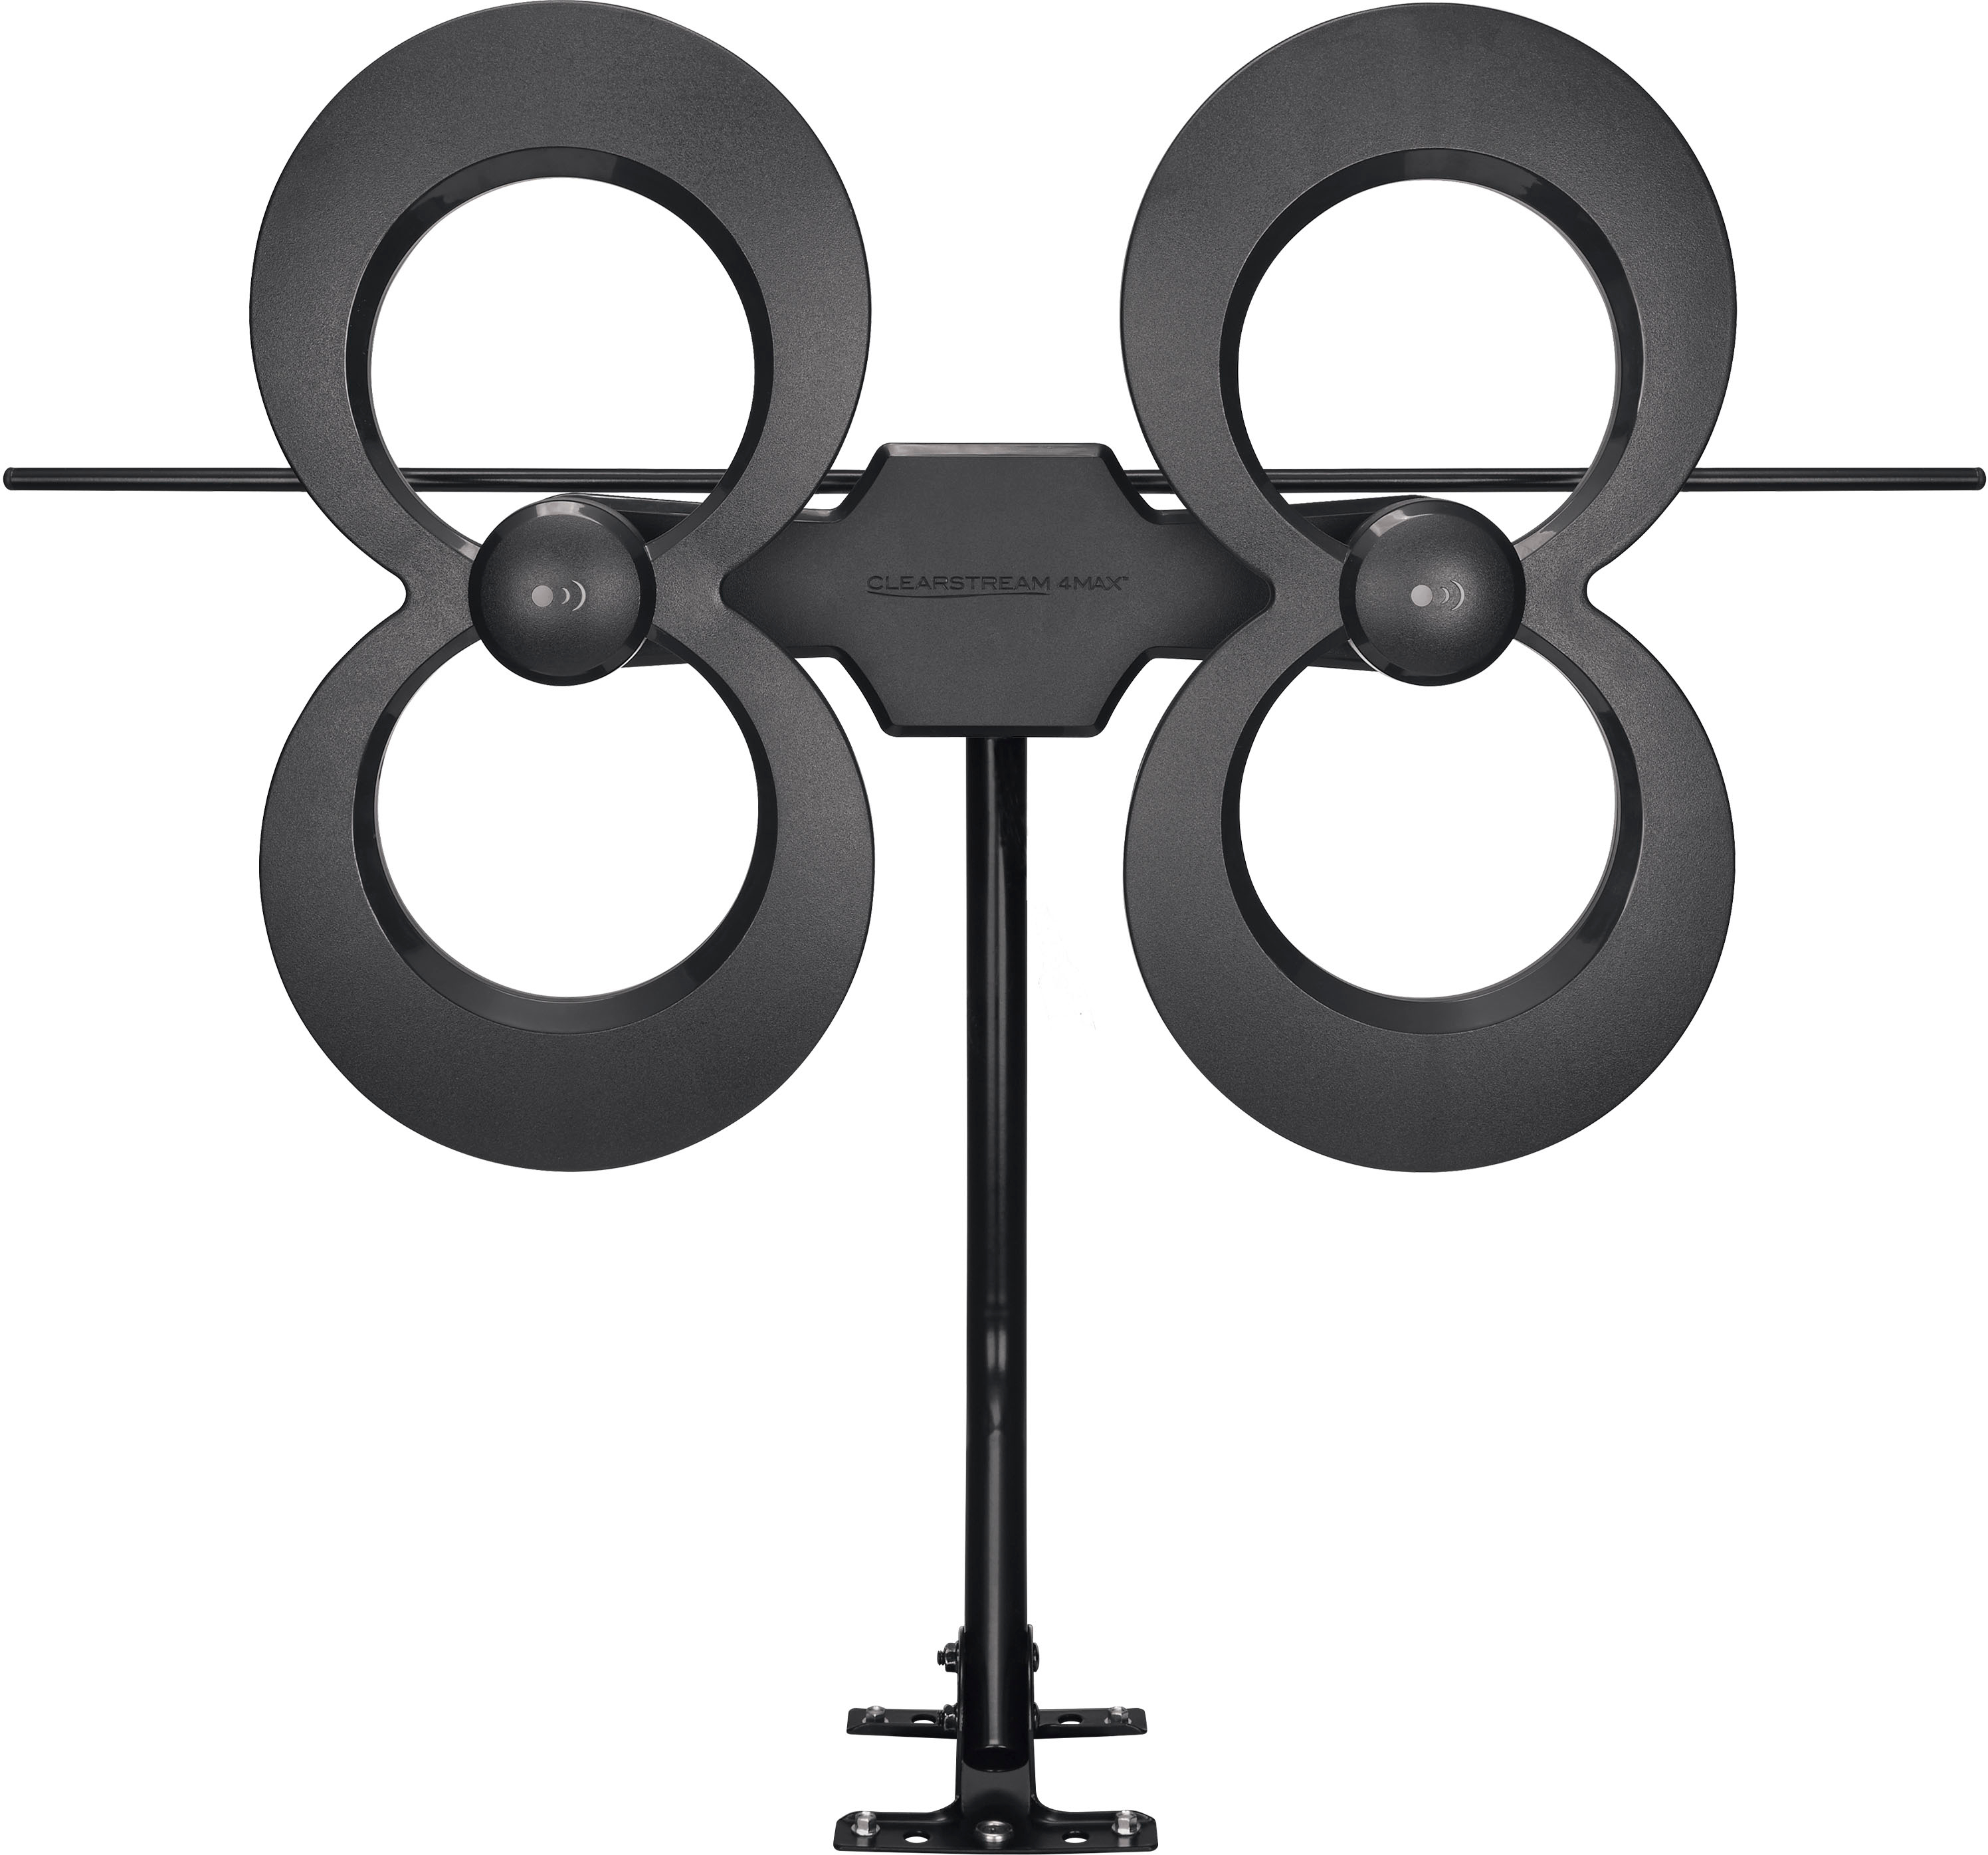 Angle View: TERK - Amplified Multi-Directional Indoor HDTV Antenna - Black